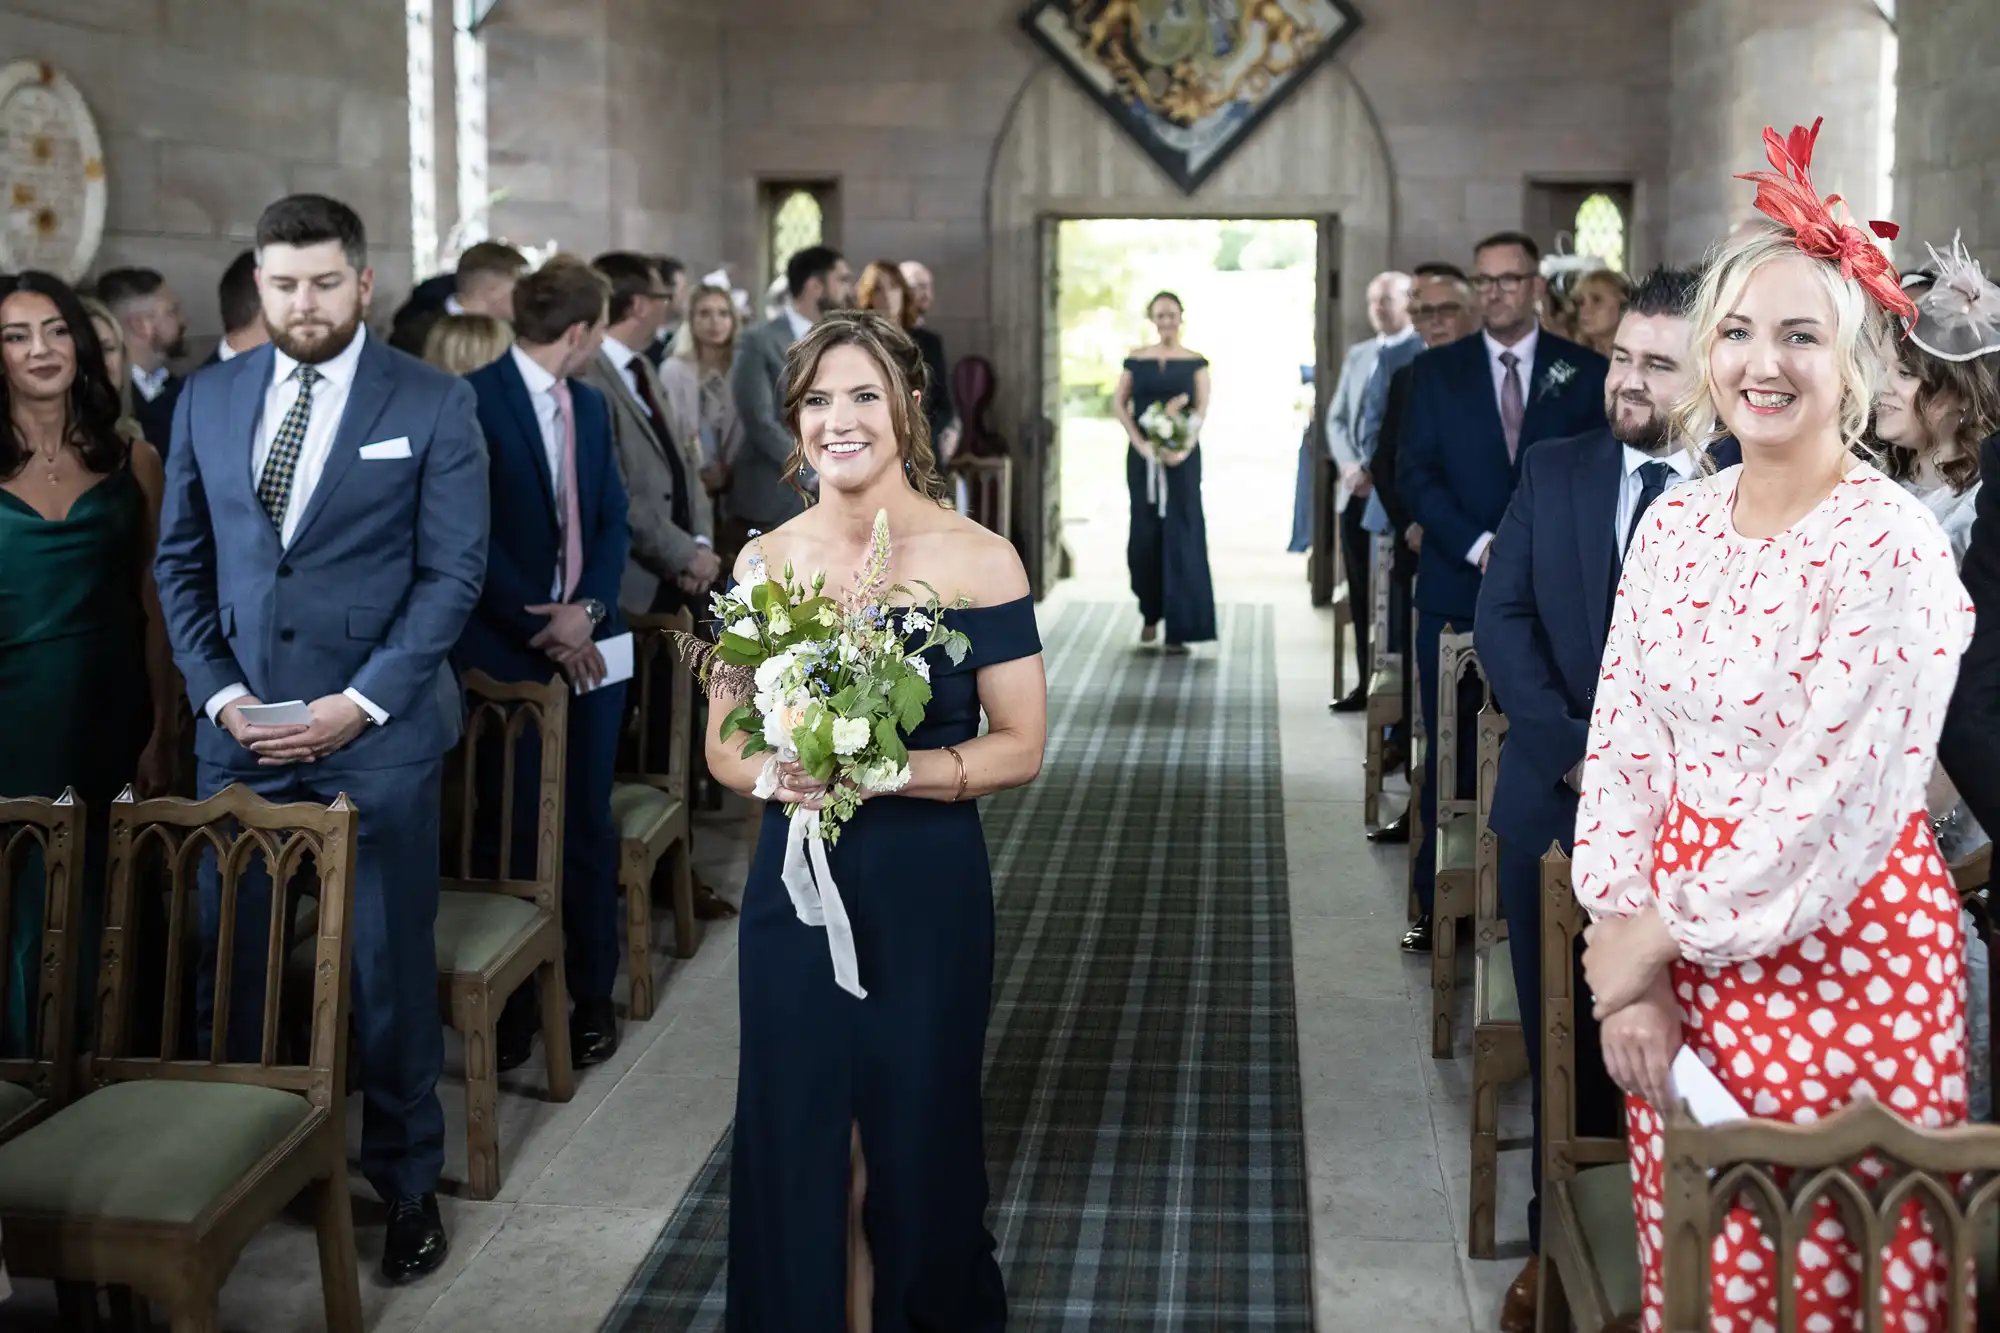 Bridesmaid smiling and walking down the aisle in a church, holding a bouquet, with guests standing and watching.